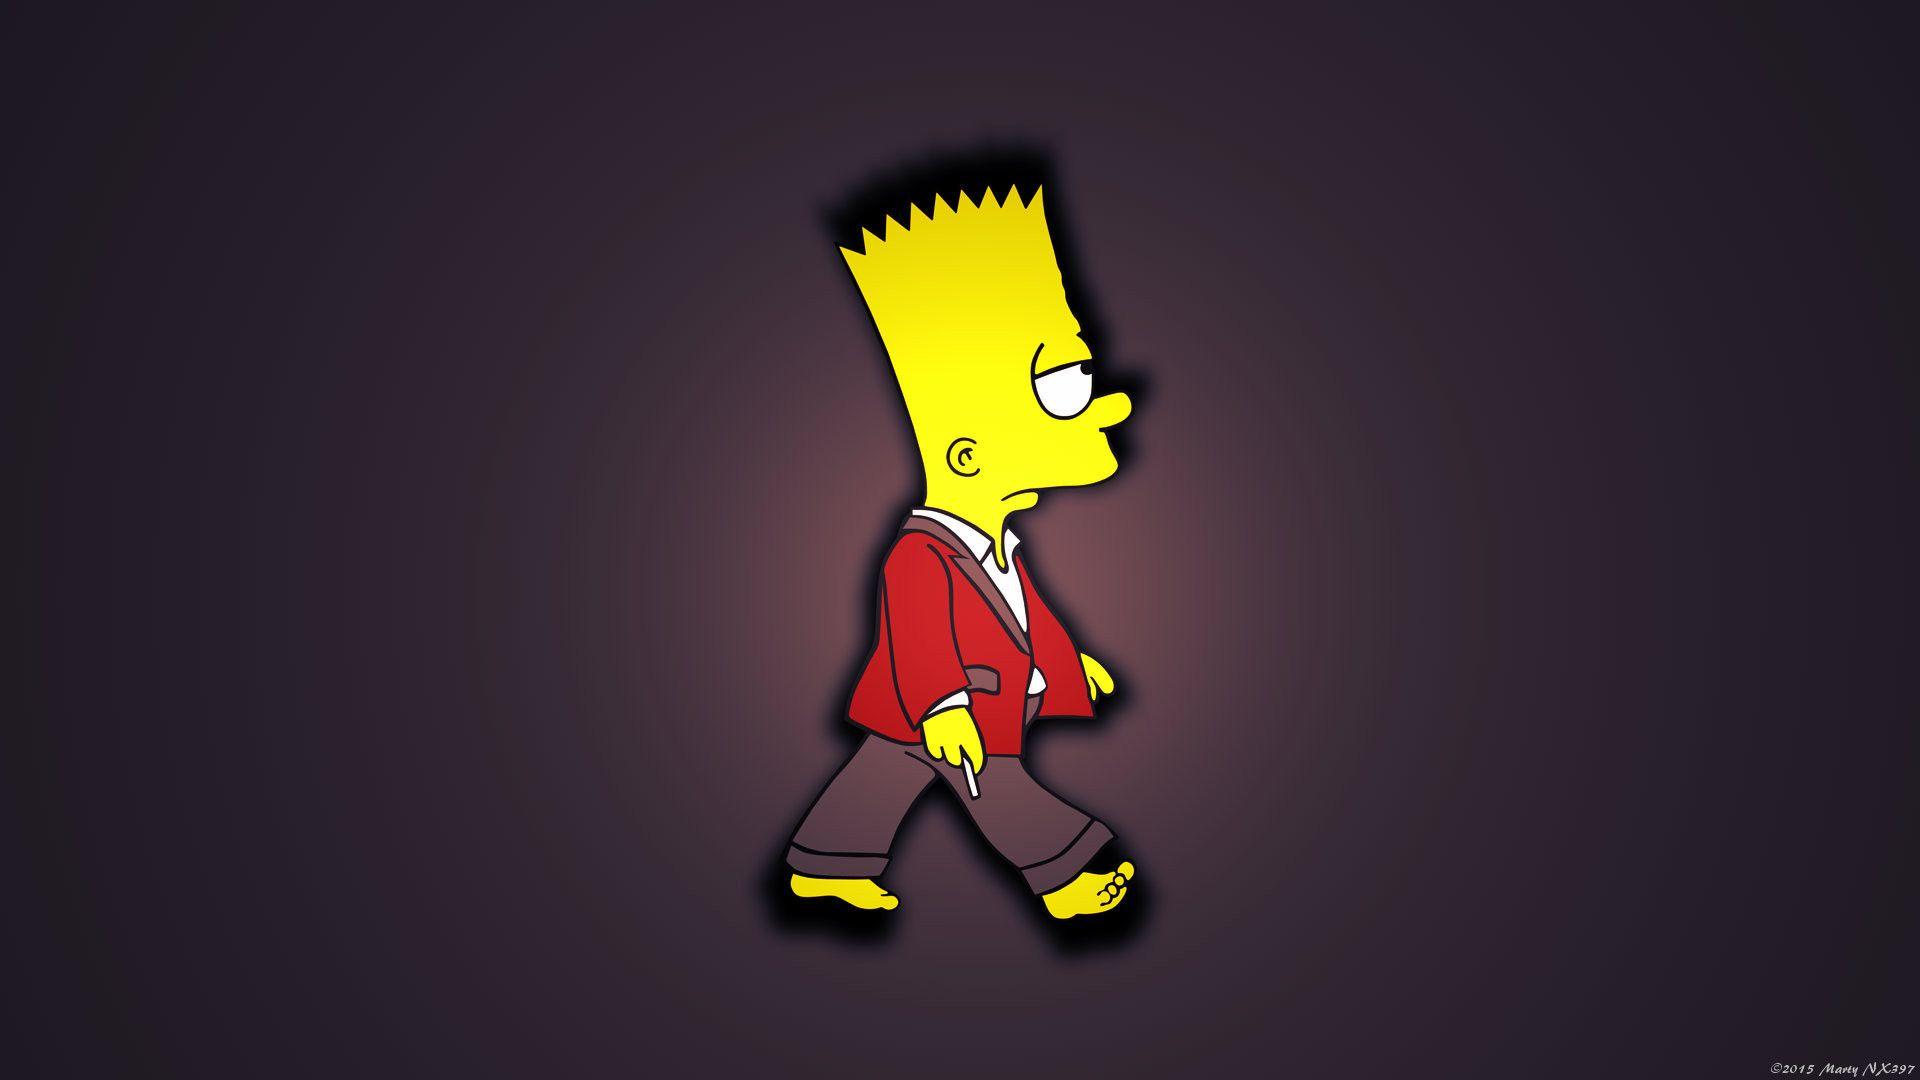 Wallpaper ID 385499  TV Show The Simpsons Phone Wallpaper Maggie Simpson  Bart Simpson 1080x1920 free download